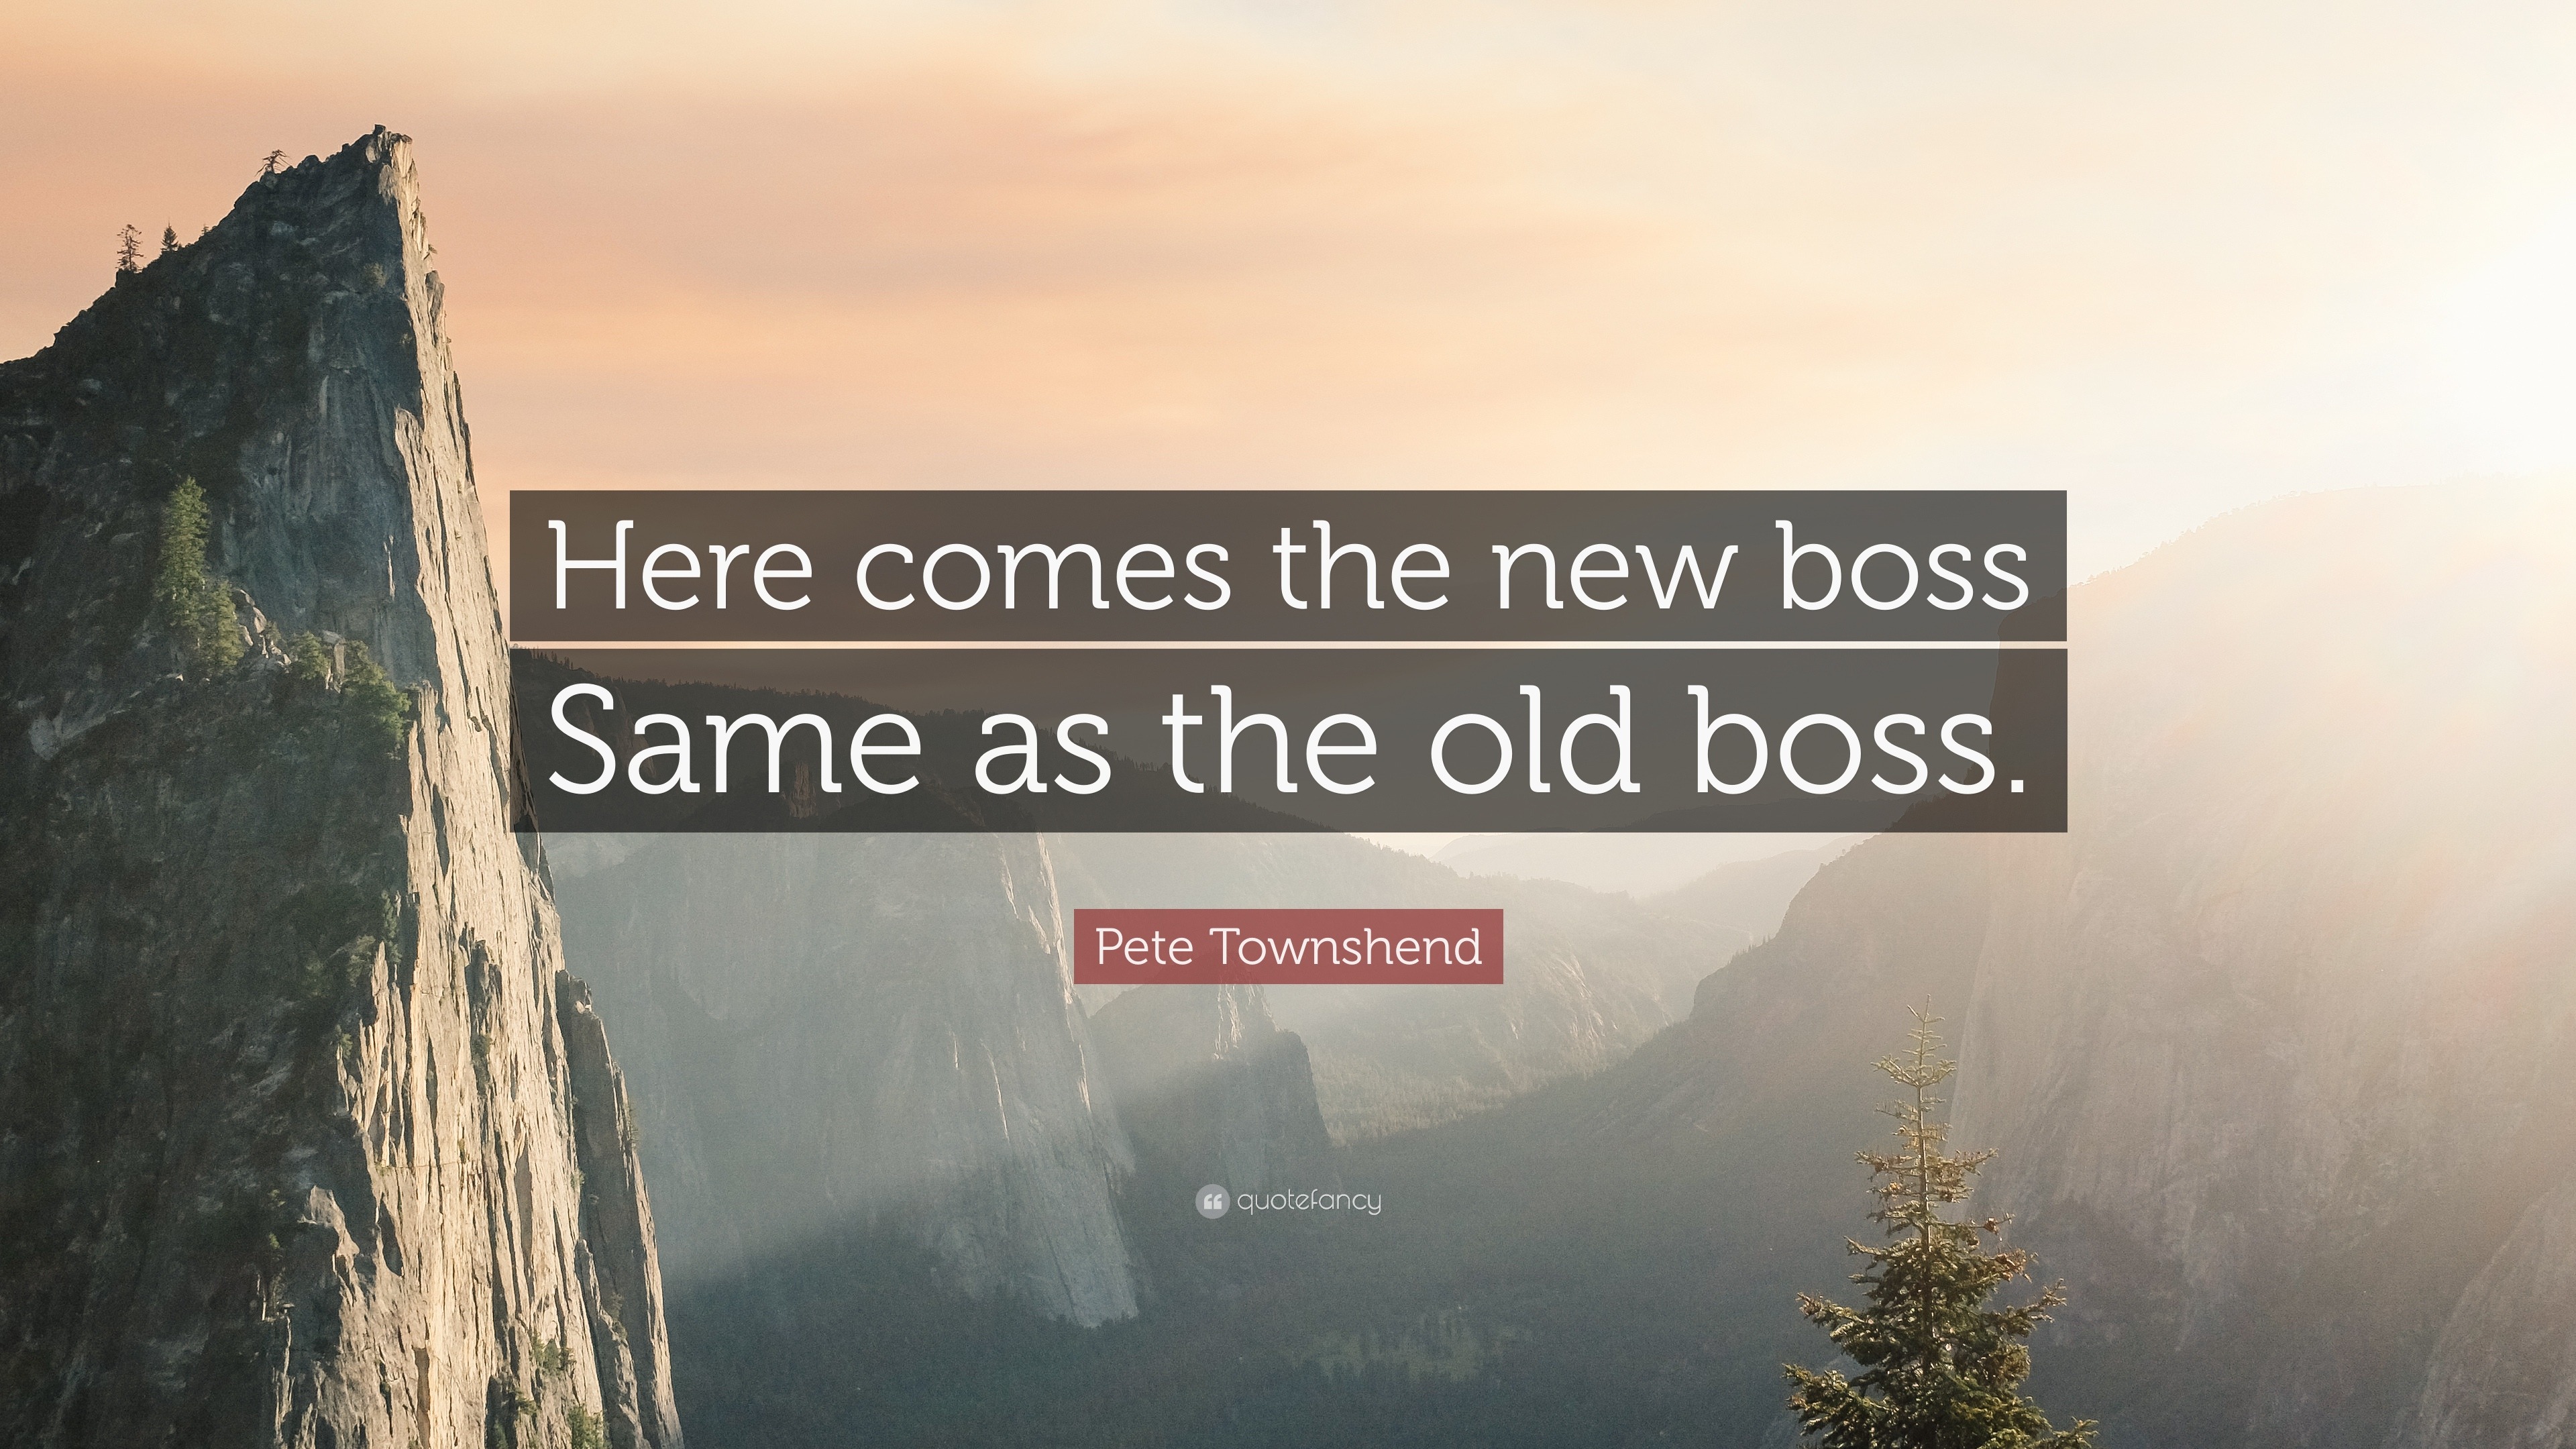 Pete Townshend “Here comes the new boss Same as the old boss.”